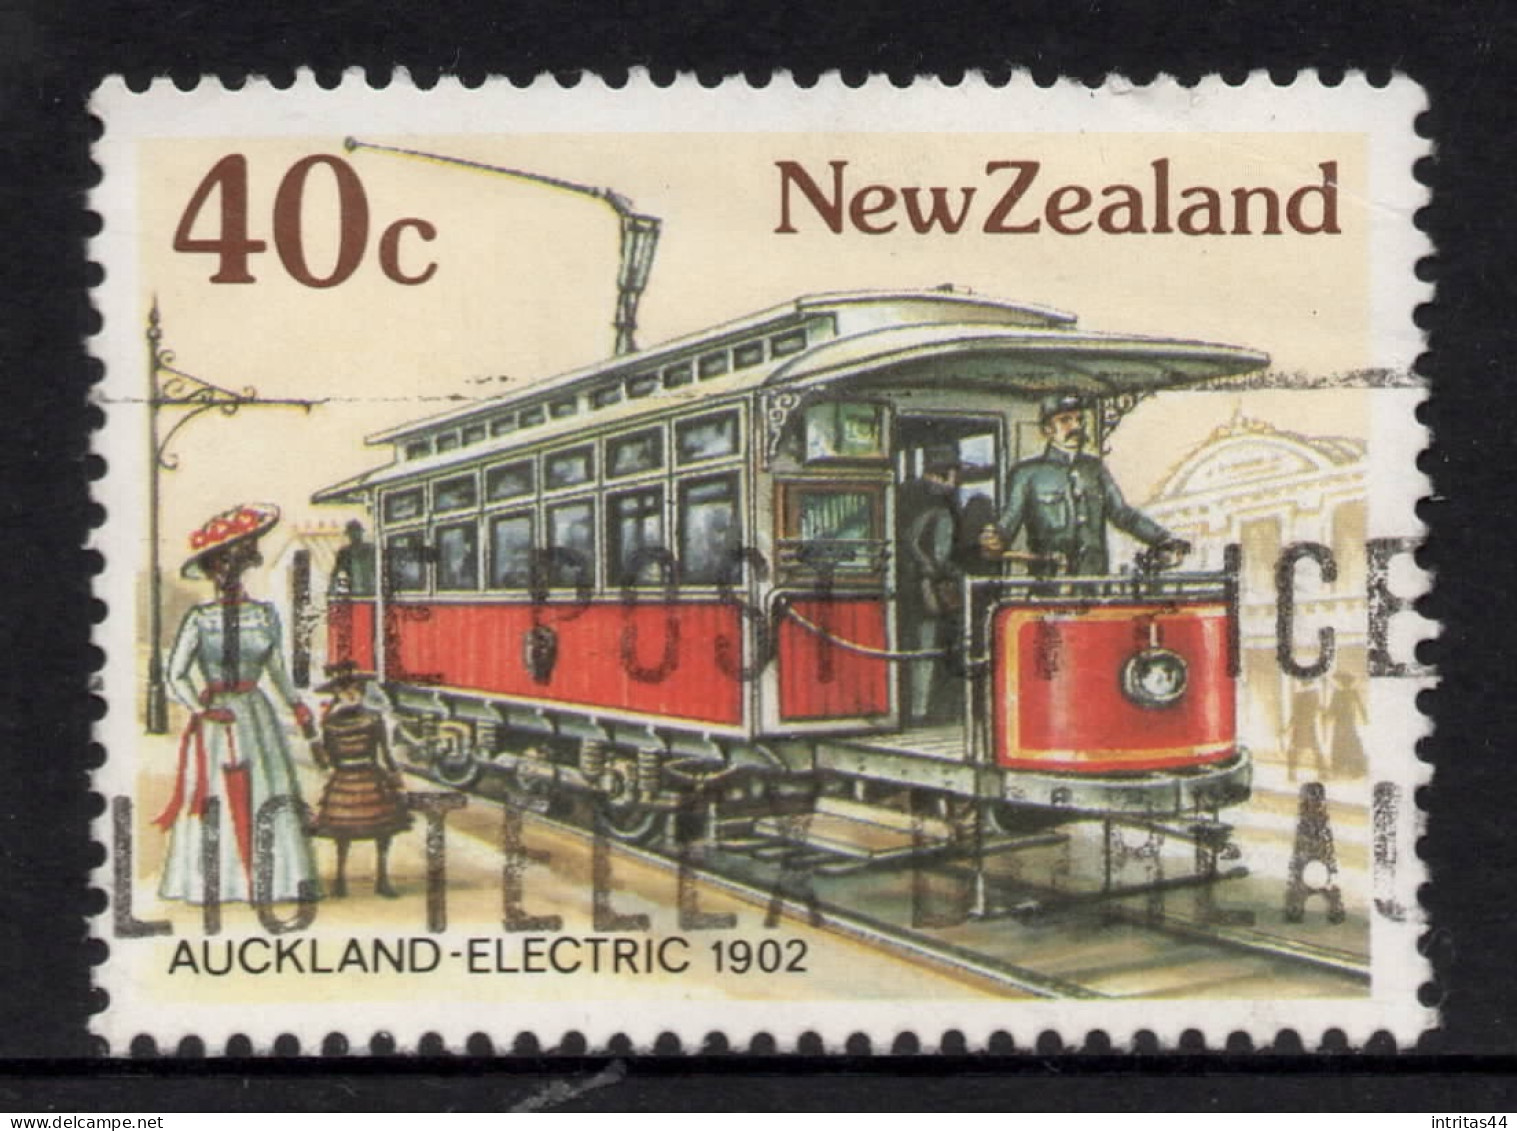 NEW ZEALAND 1985 VINTAGE TRAMS   40c  " AUCKLAND "  STAMP VFU - Used Stamps